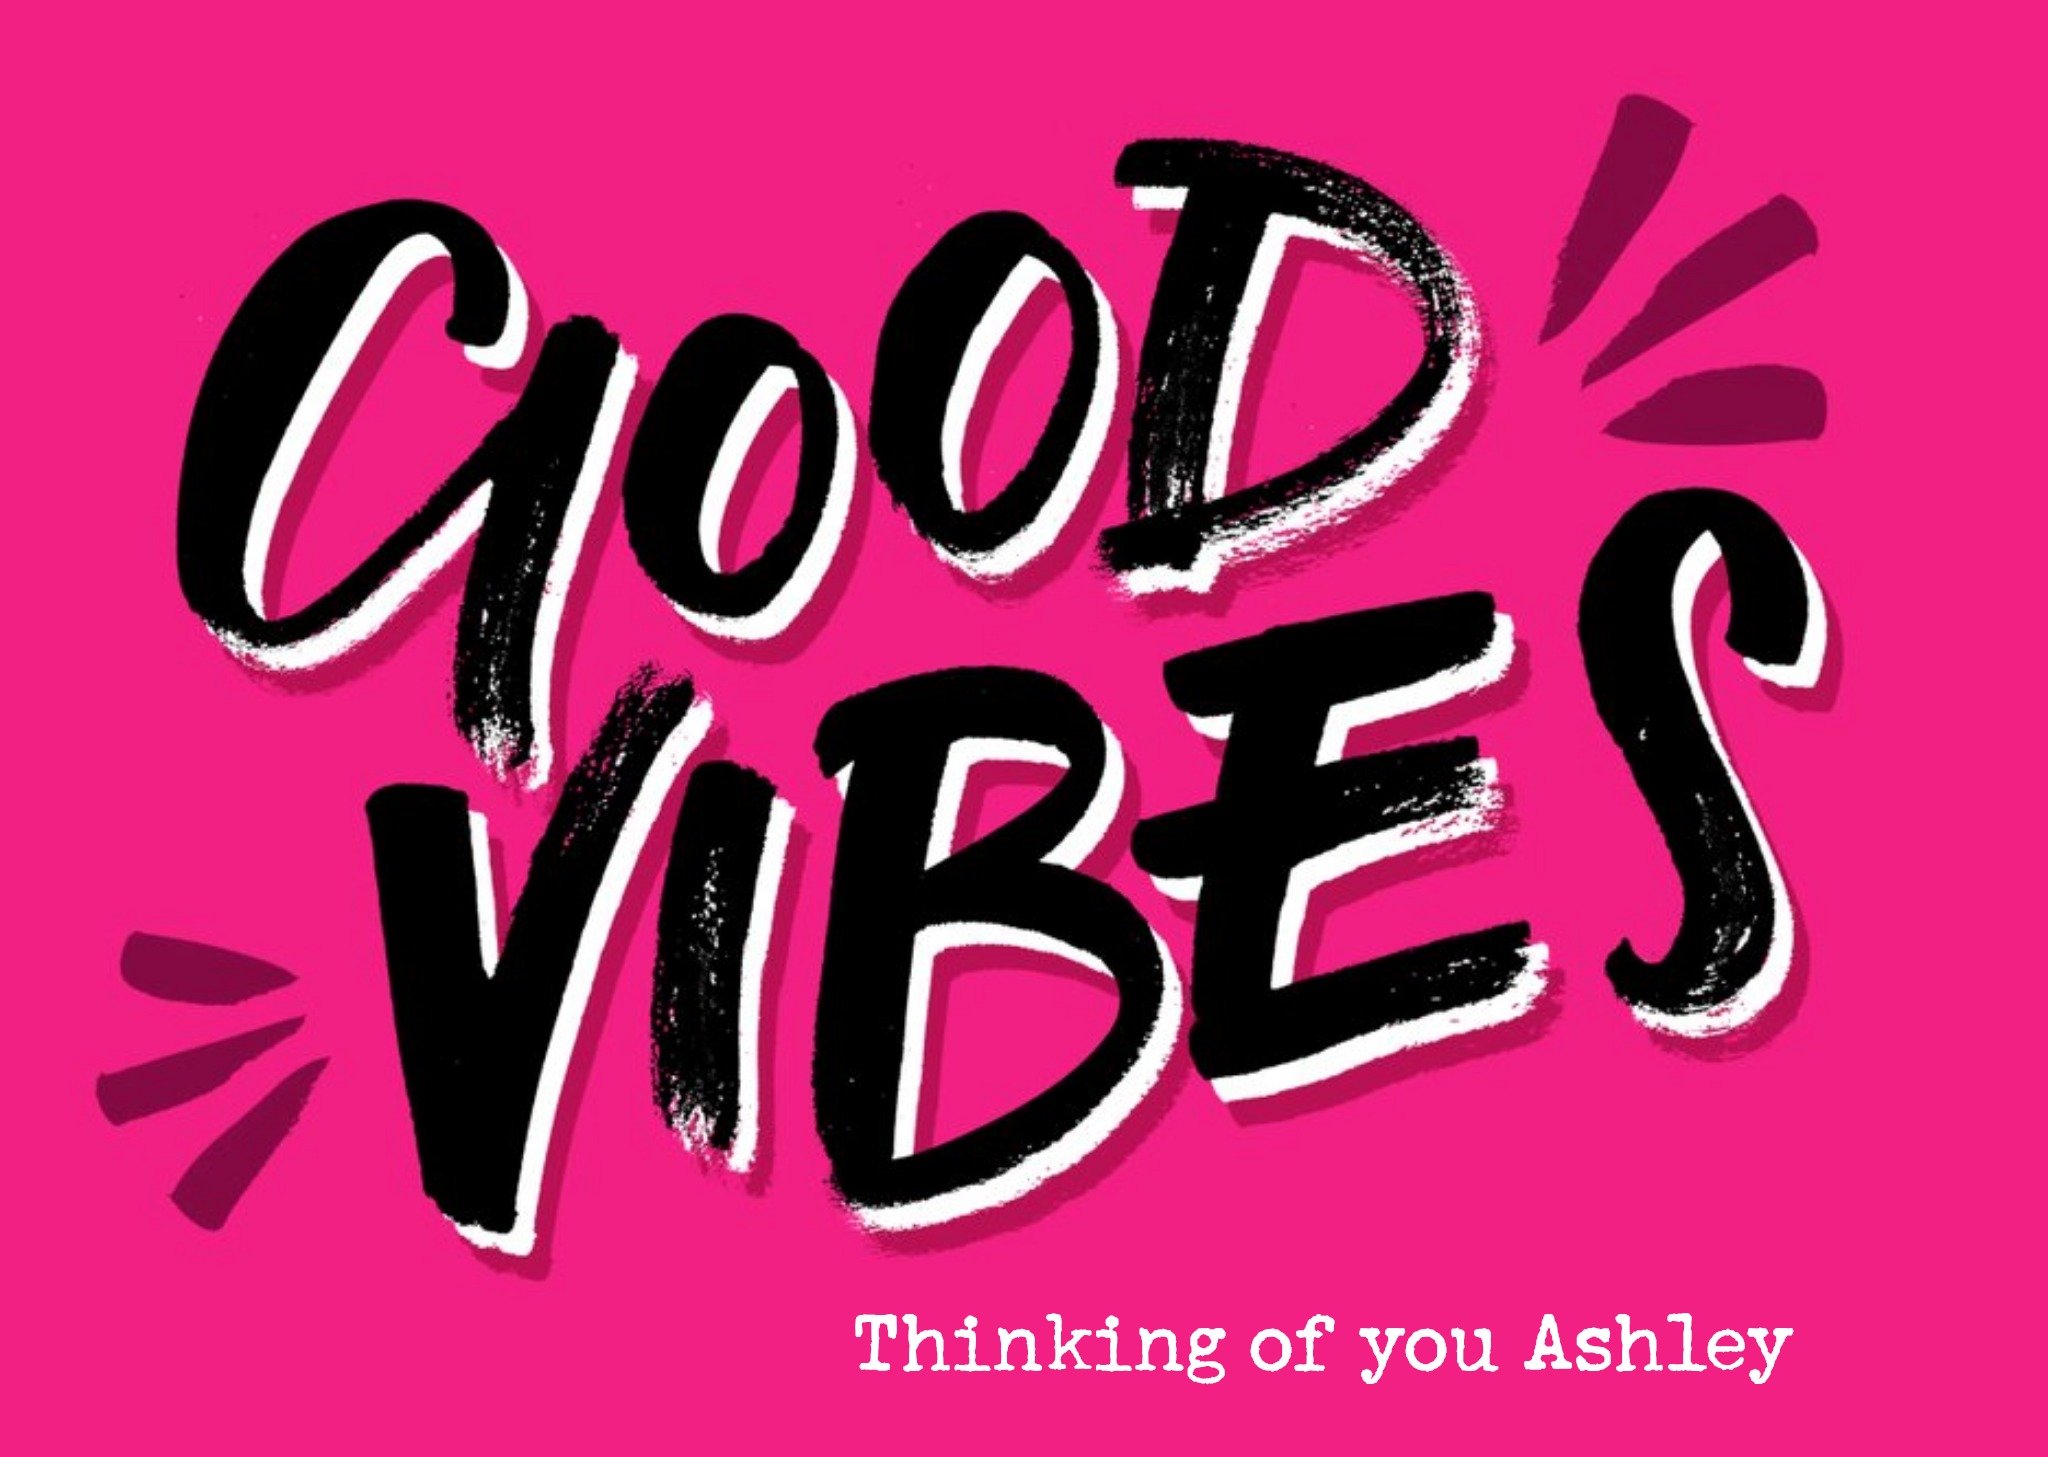 Moonpig Hand Painted Typography On A Pink Background Good Vibes Thinking Of You Card, Large